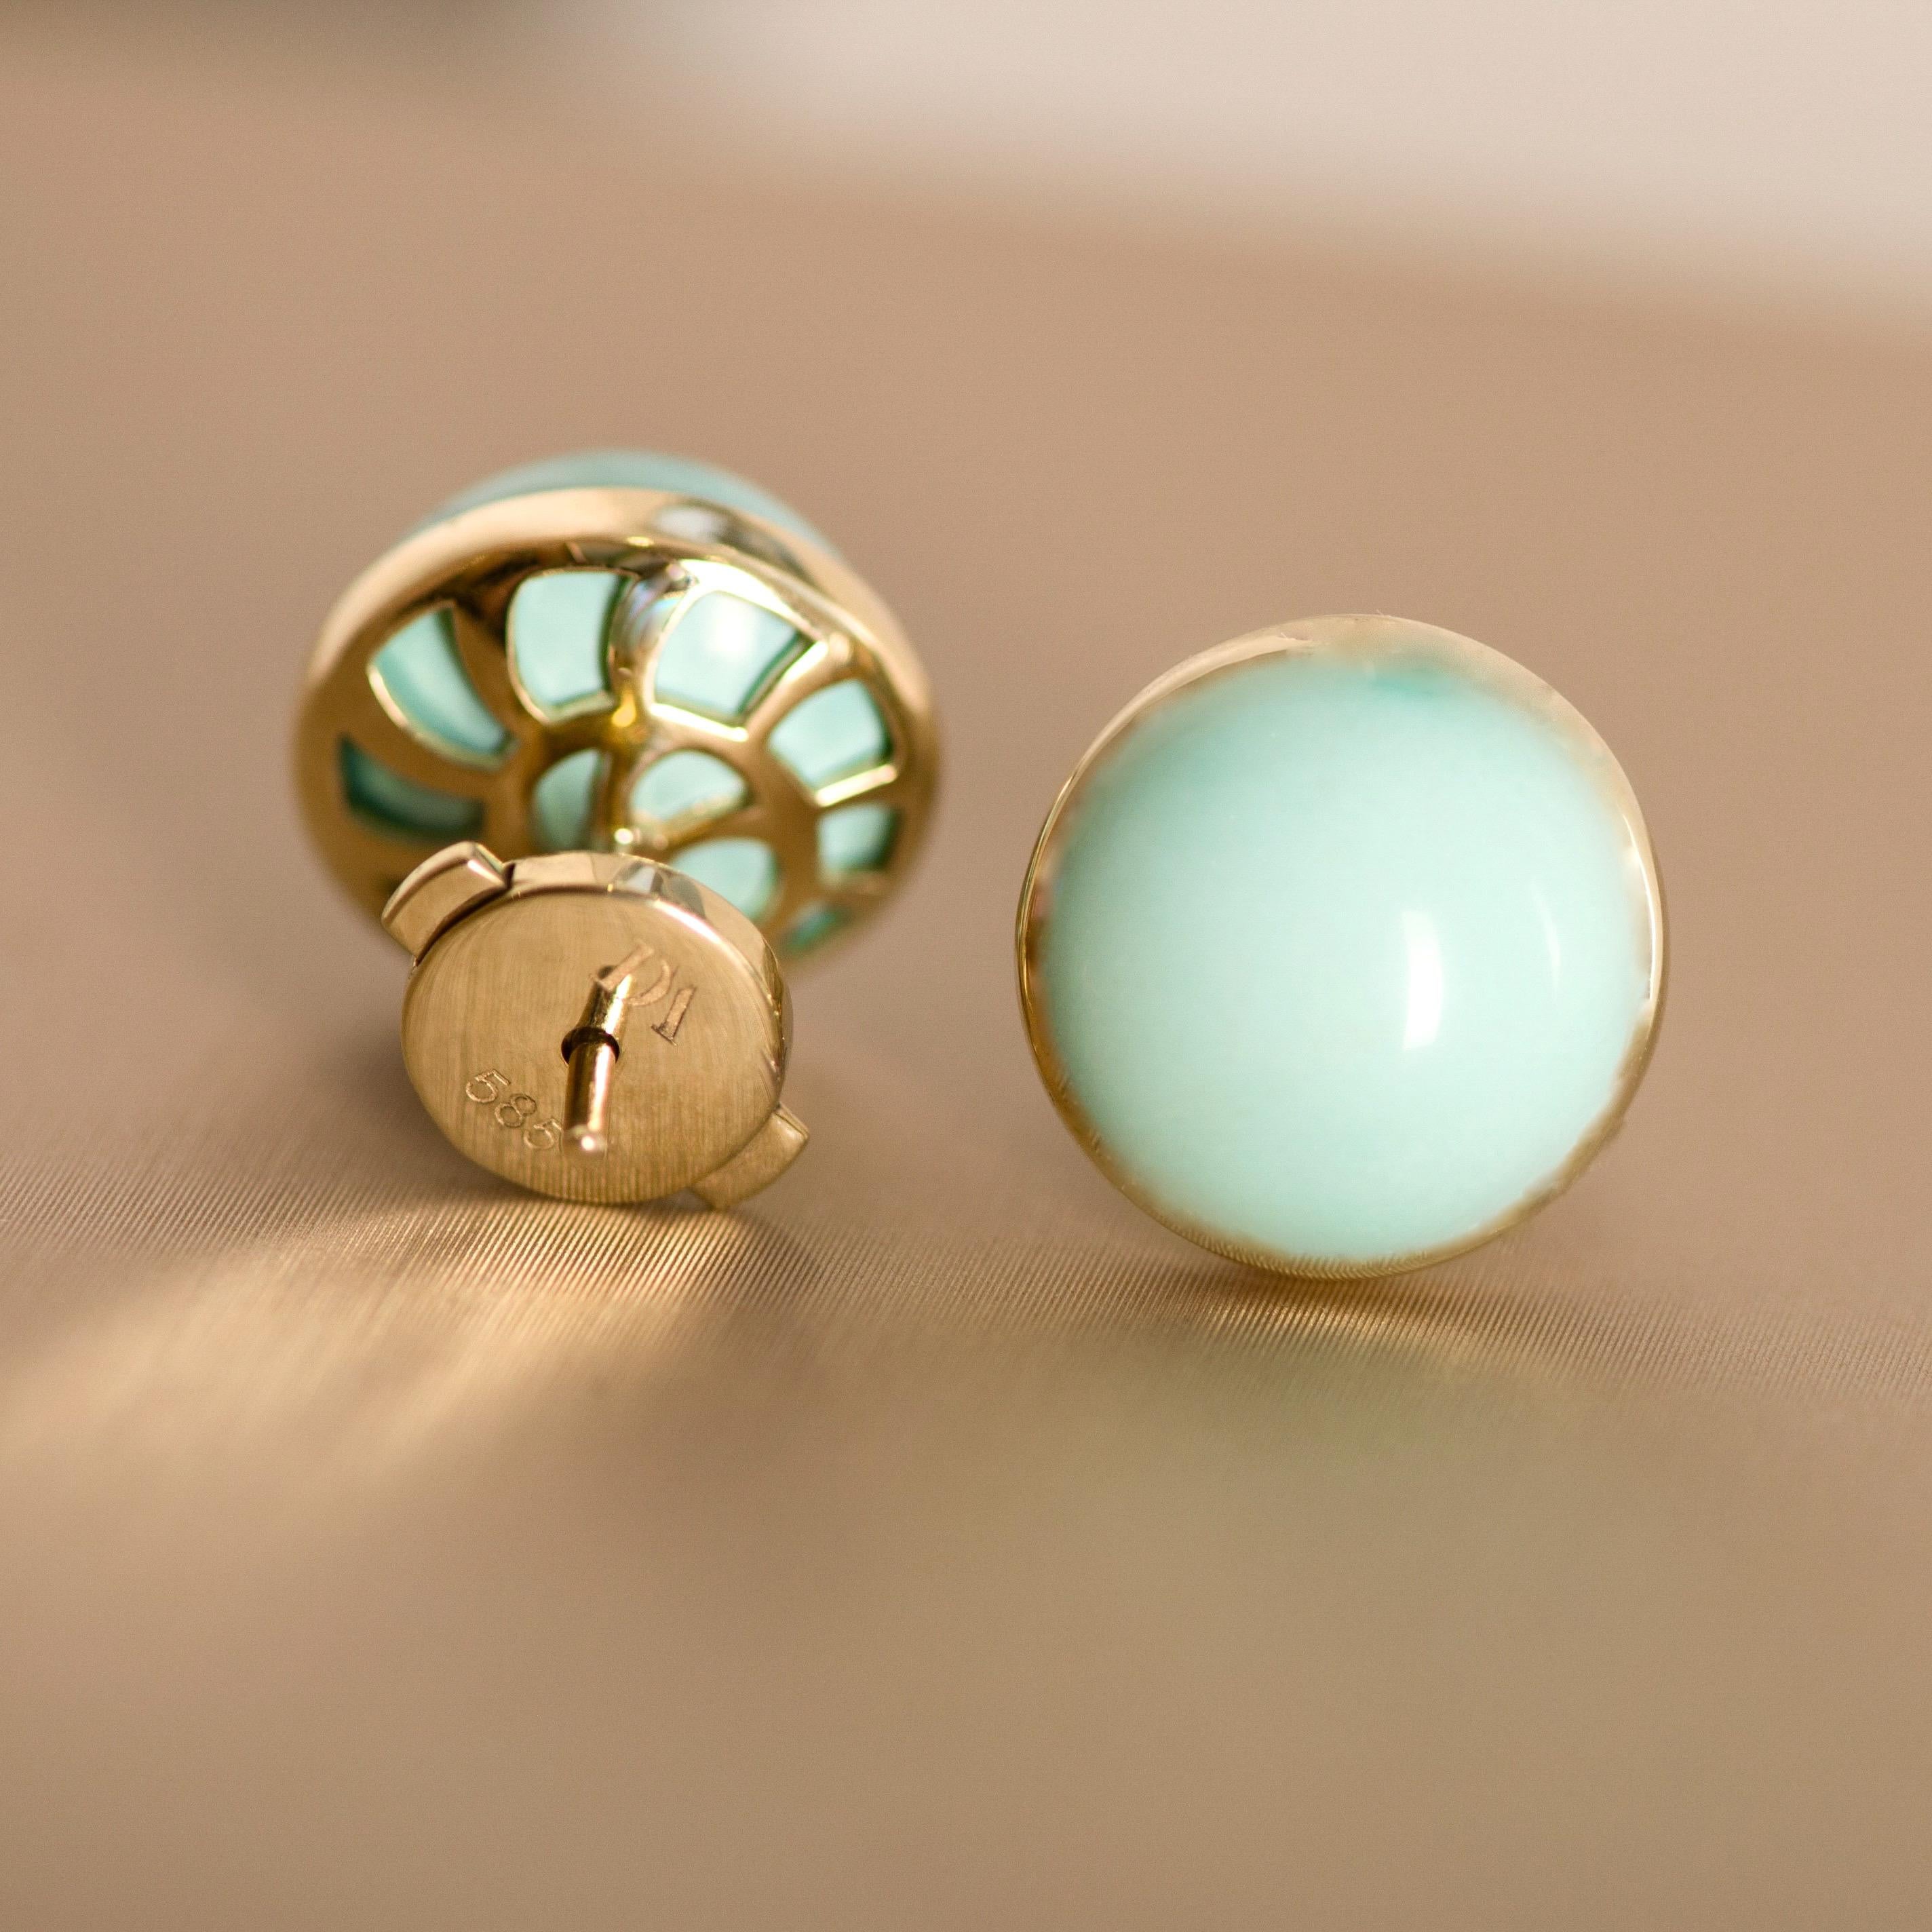 Gold stud earrings with natural turquoise - an elegant every day jewelry.
It is very stylish and attractive.
When you work with such intense colored stones as this vivd blue turquoise - you don't want to add a lot of details to the design. That's